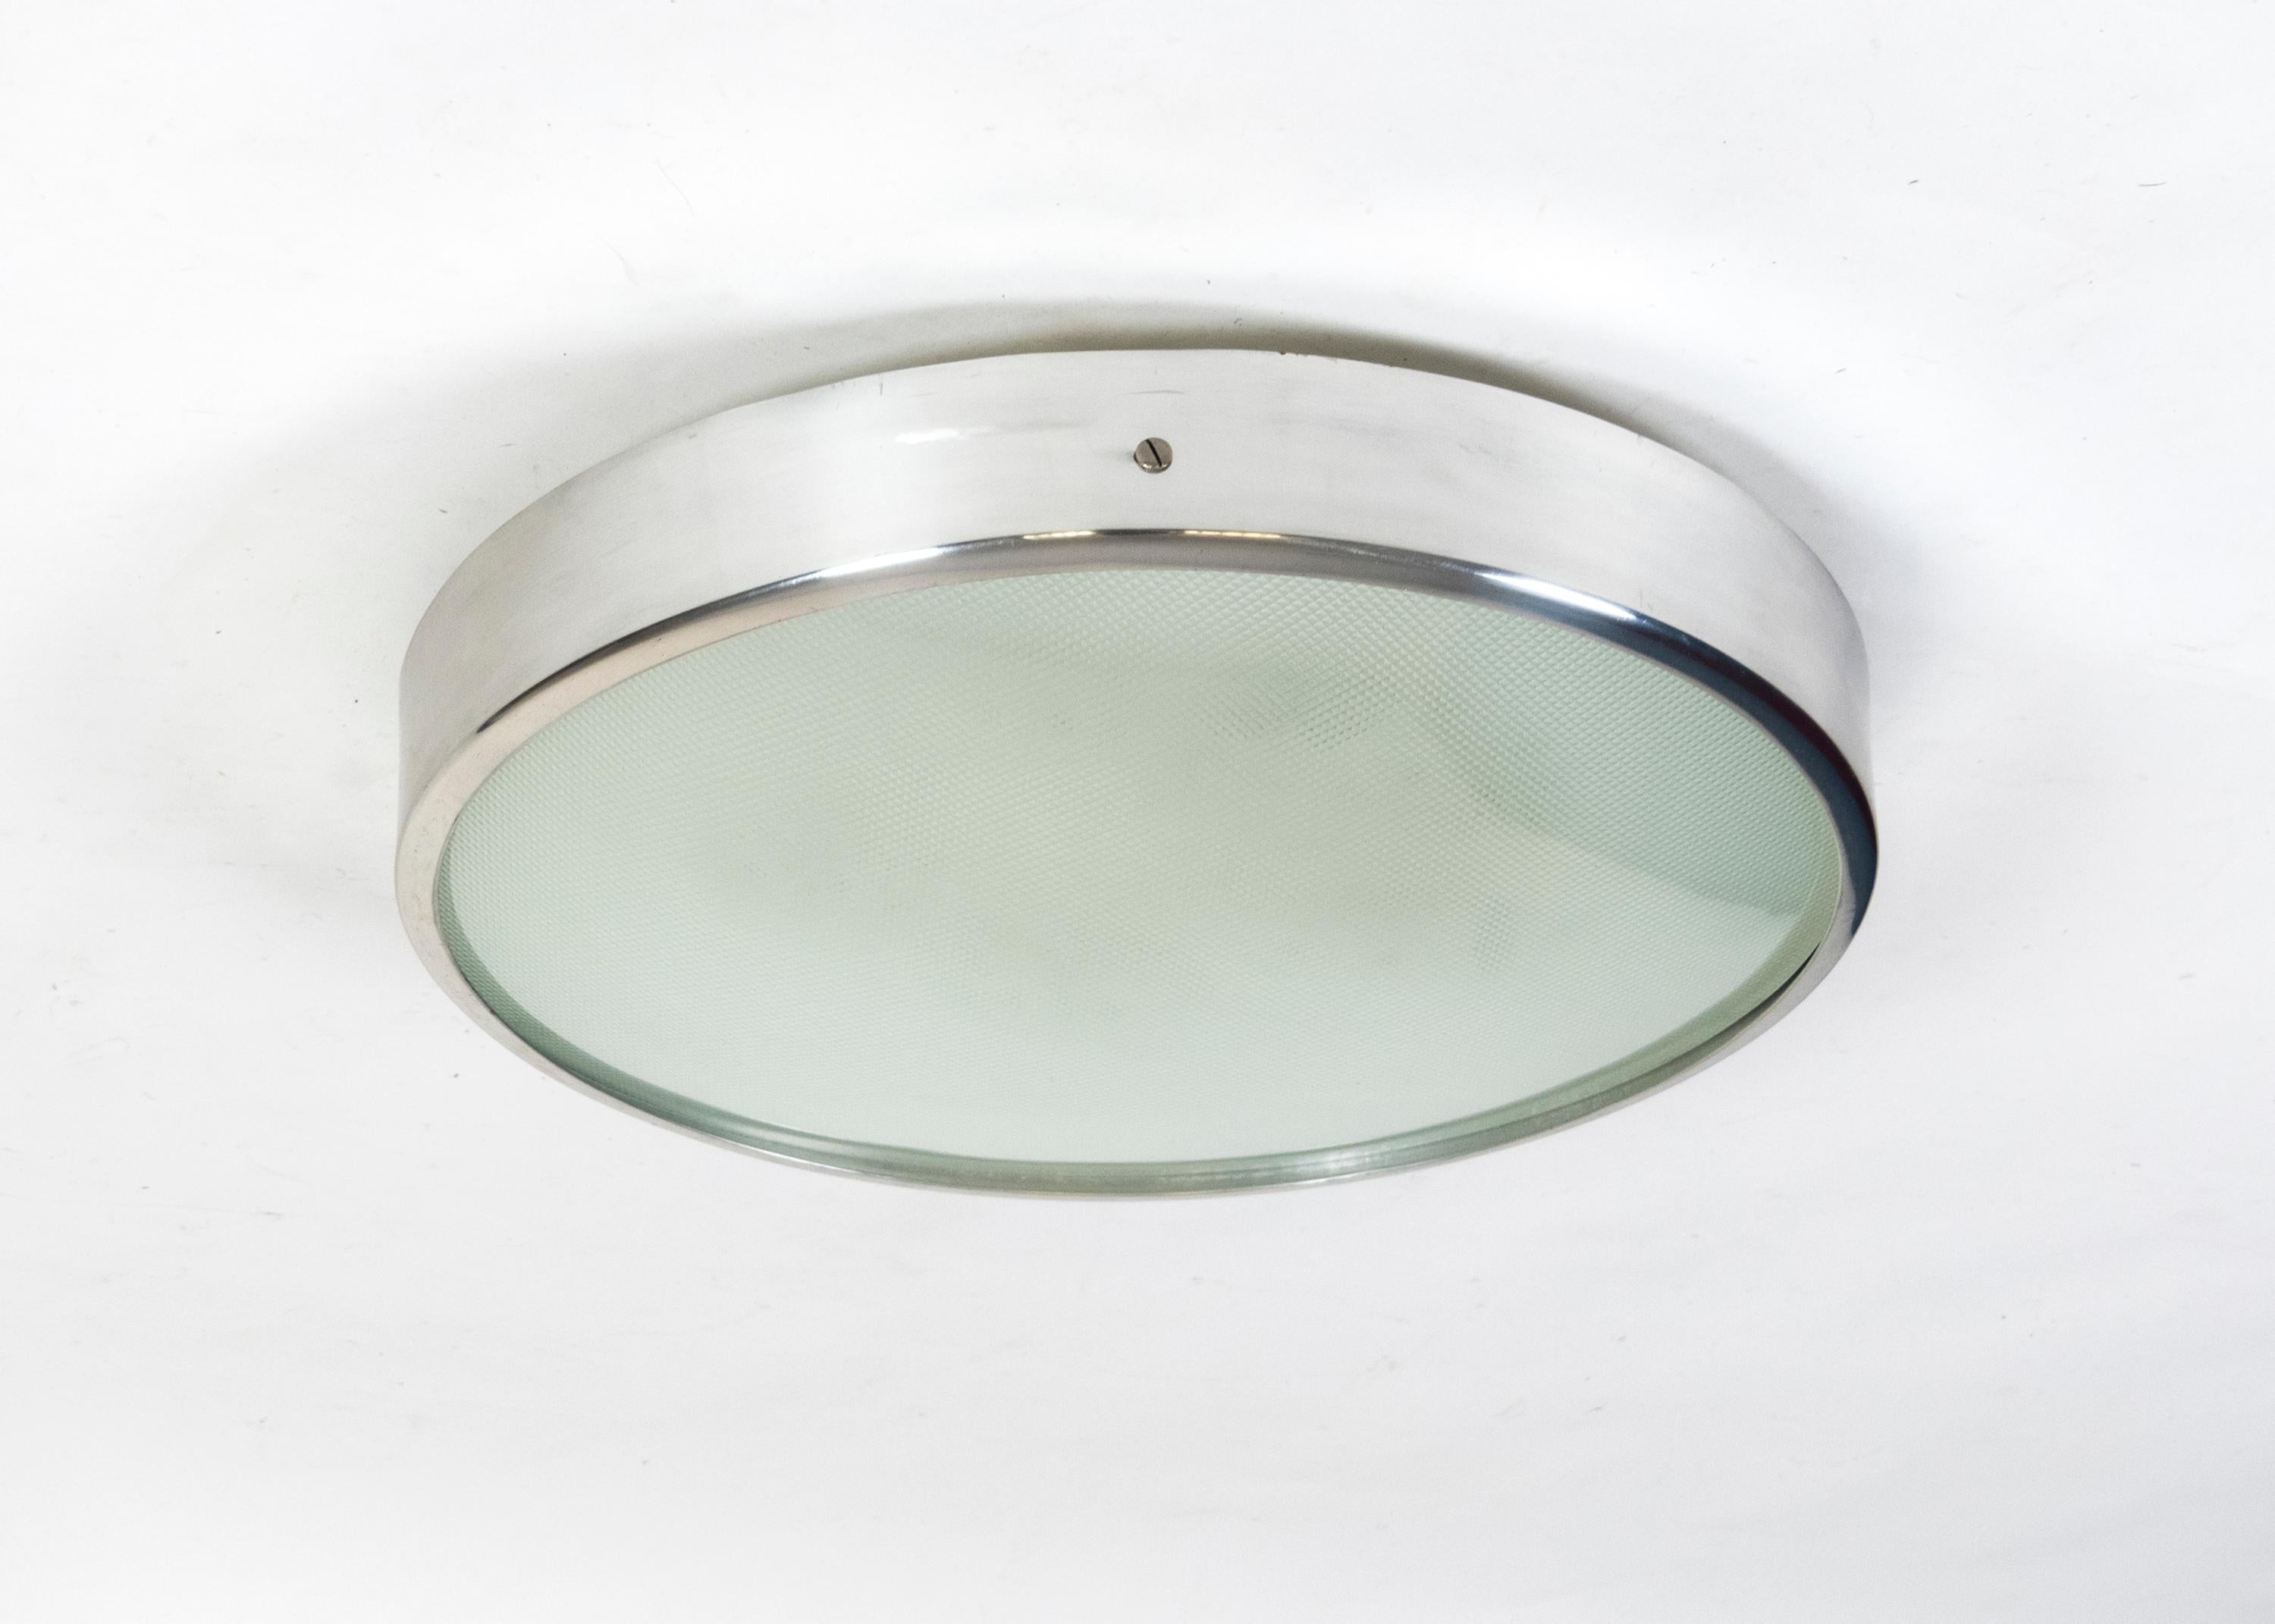 Important flush mount by Italian lighting master Gino Sarfatti, designed in the 1950s for his own company Arteluce. This very piece was produced in the 1960s and is model 3001, that was manufactured different sizes. This is the rare largest model.